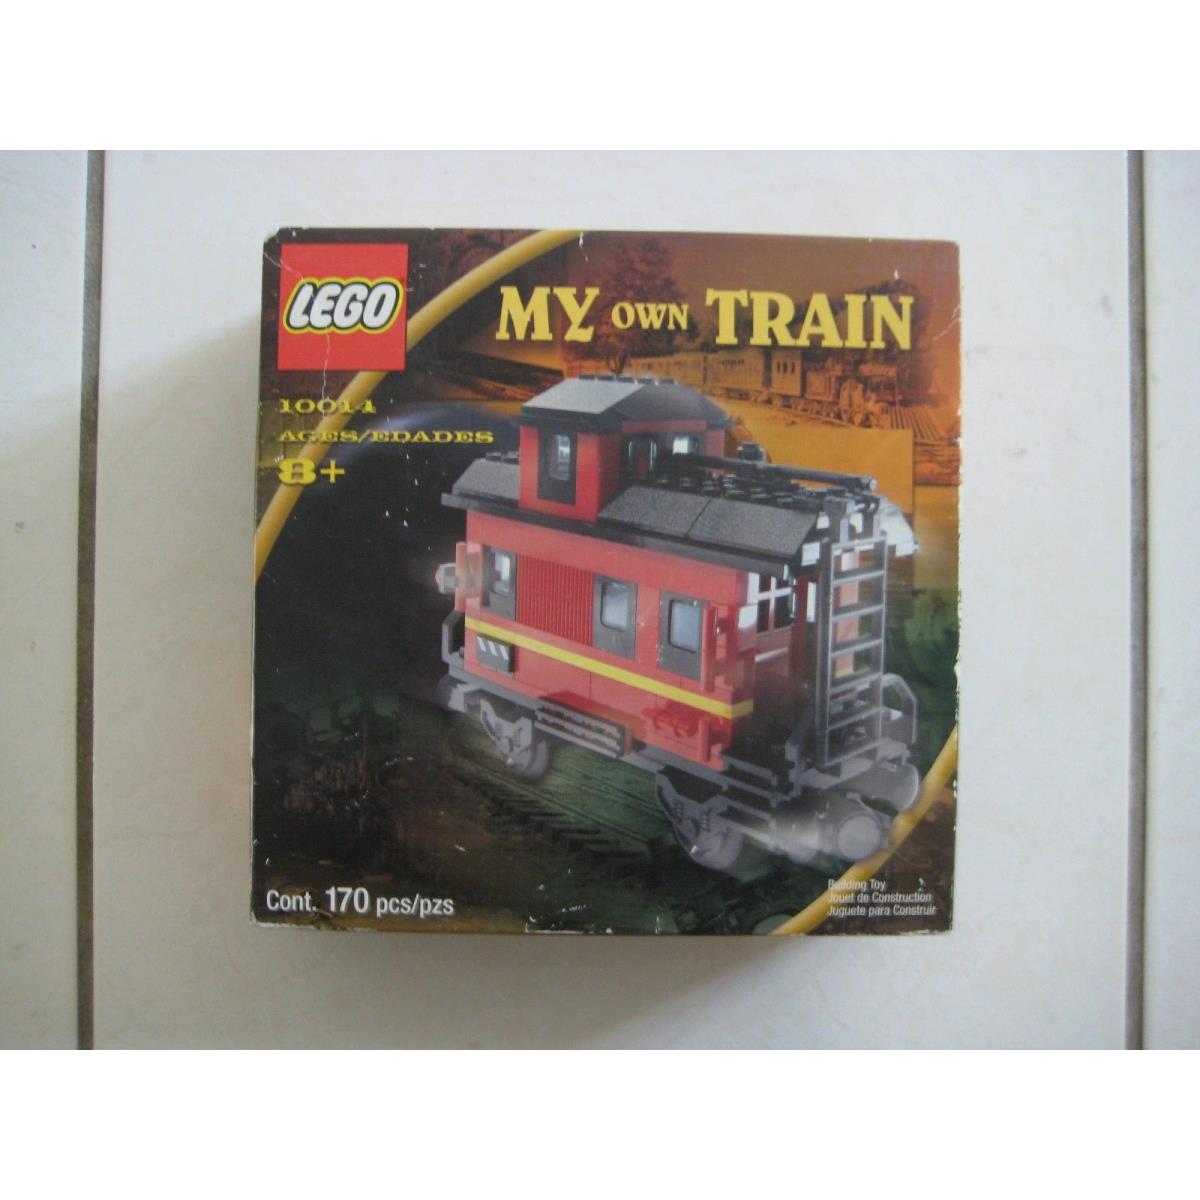 Lego My Own Train Red Caboose 10014 Box